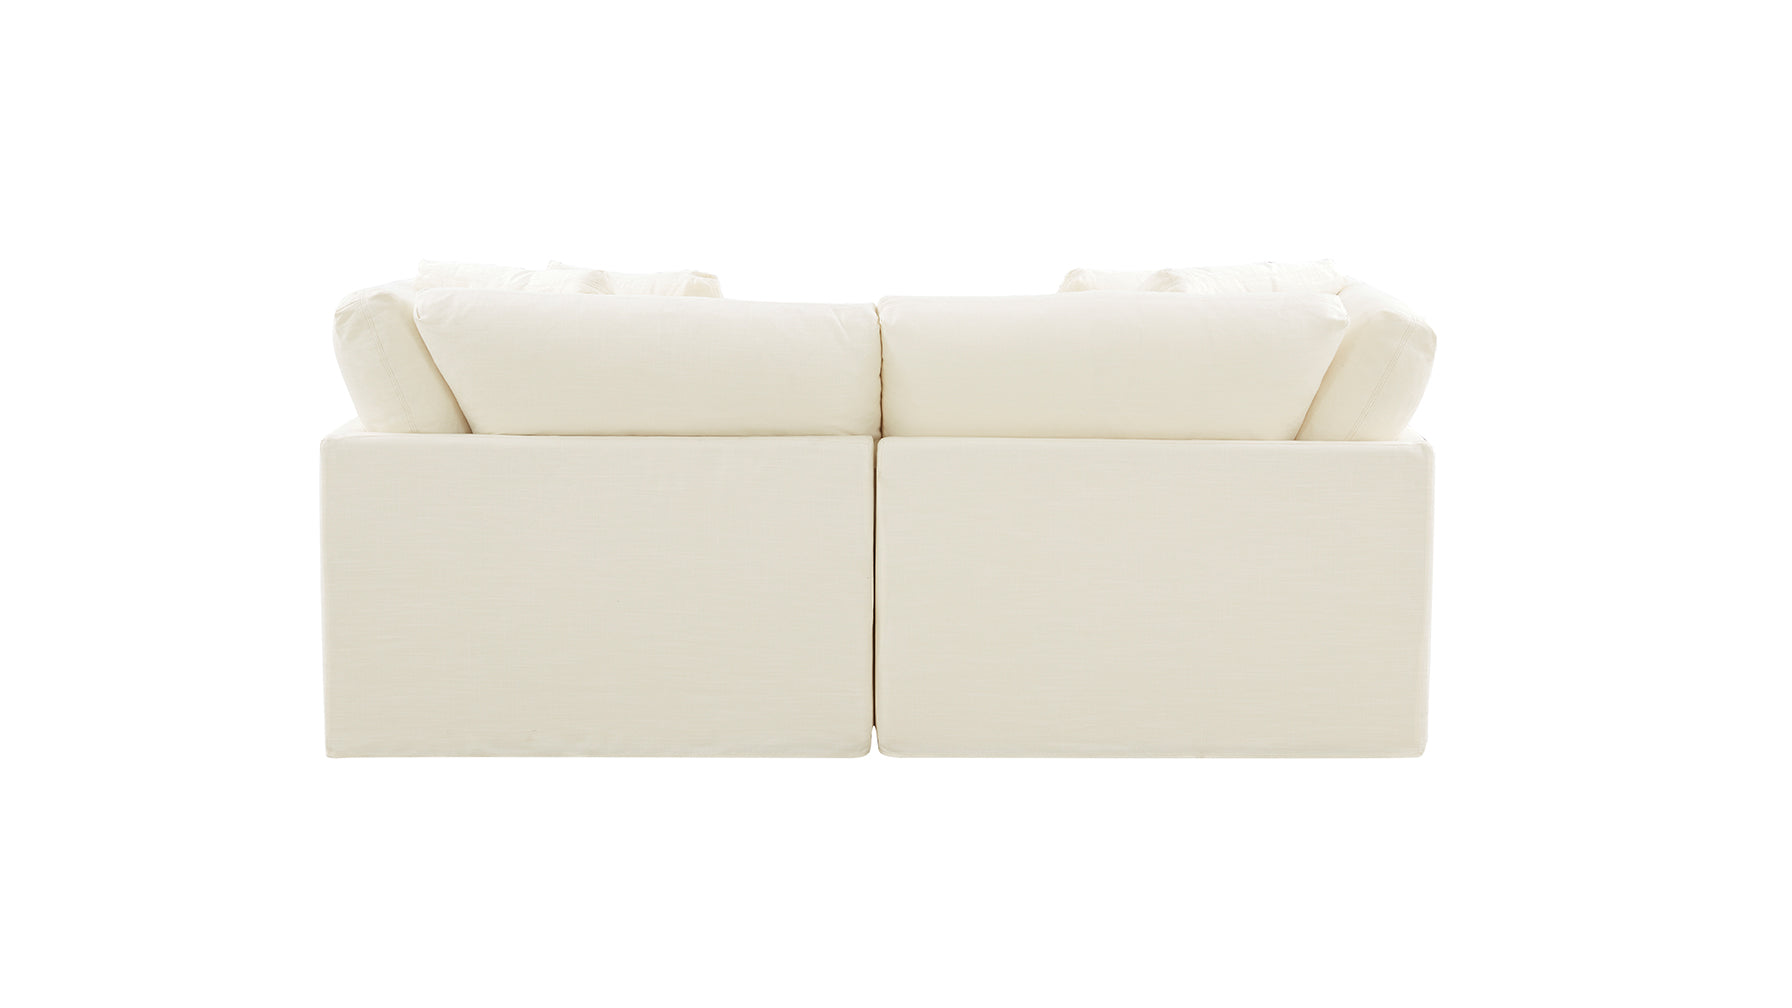 Get Together™ 3-Piece Modular Sectional, Large, Cream Linen - Image 7